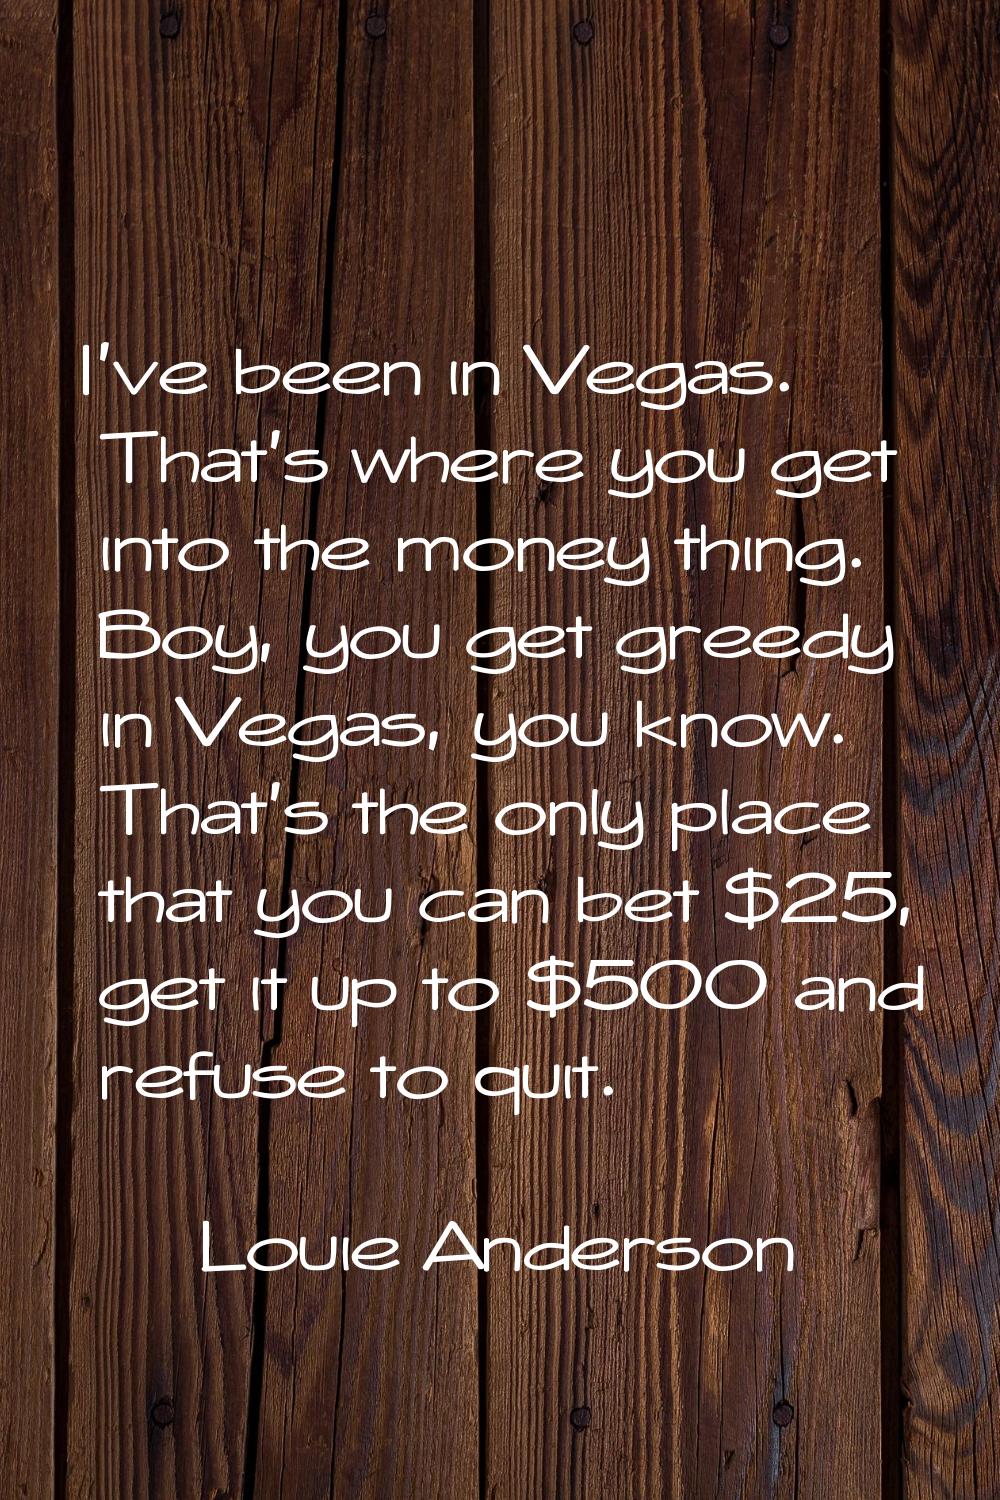 I've been in Vegas. That's where you get into the money thing. Boy, you get greedy in Vegas, you kn